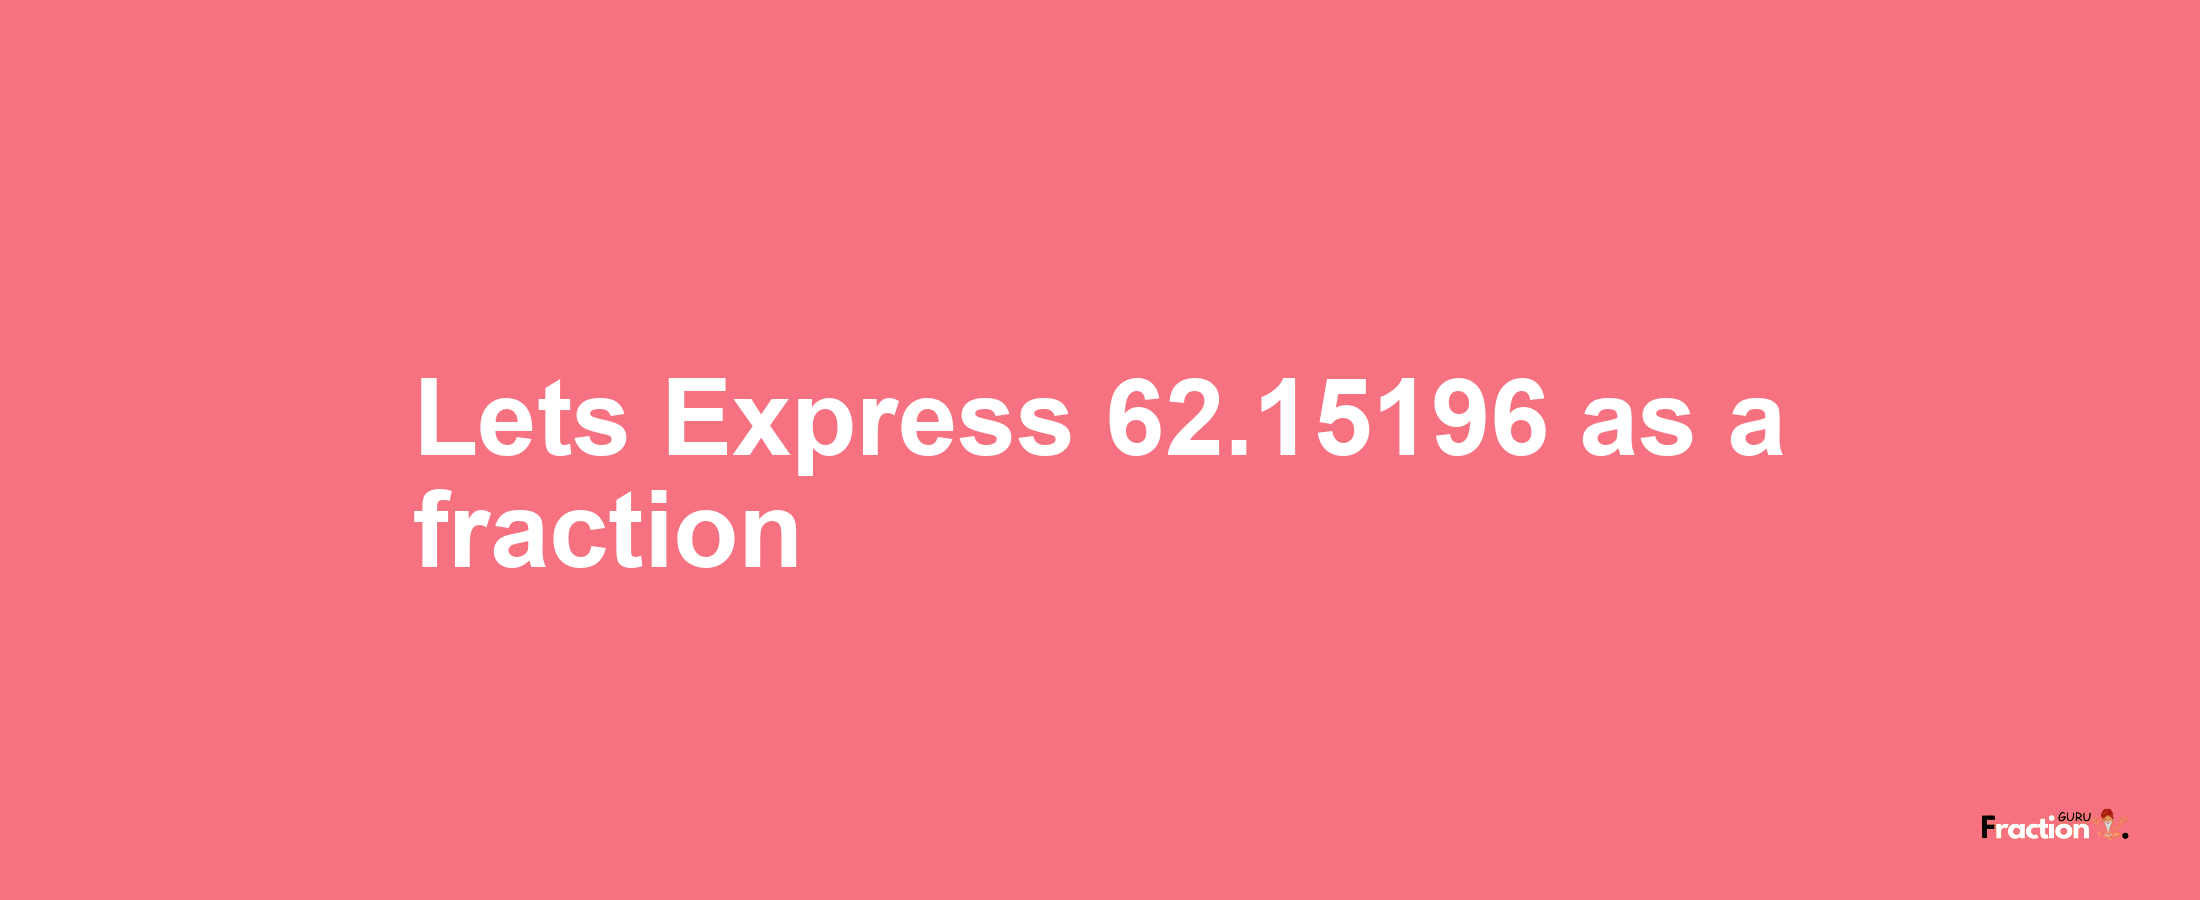 Lets Express 62.15196 as afraction